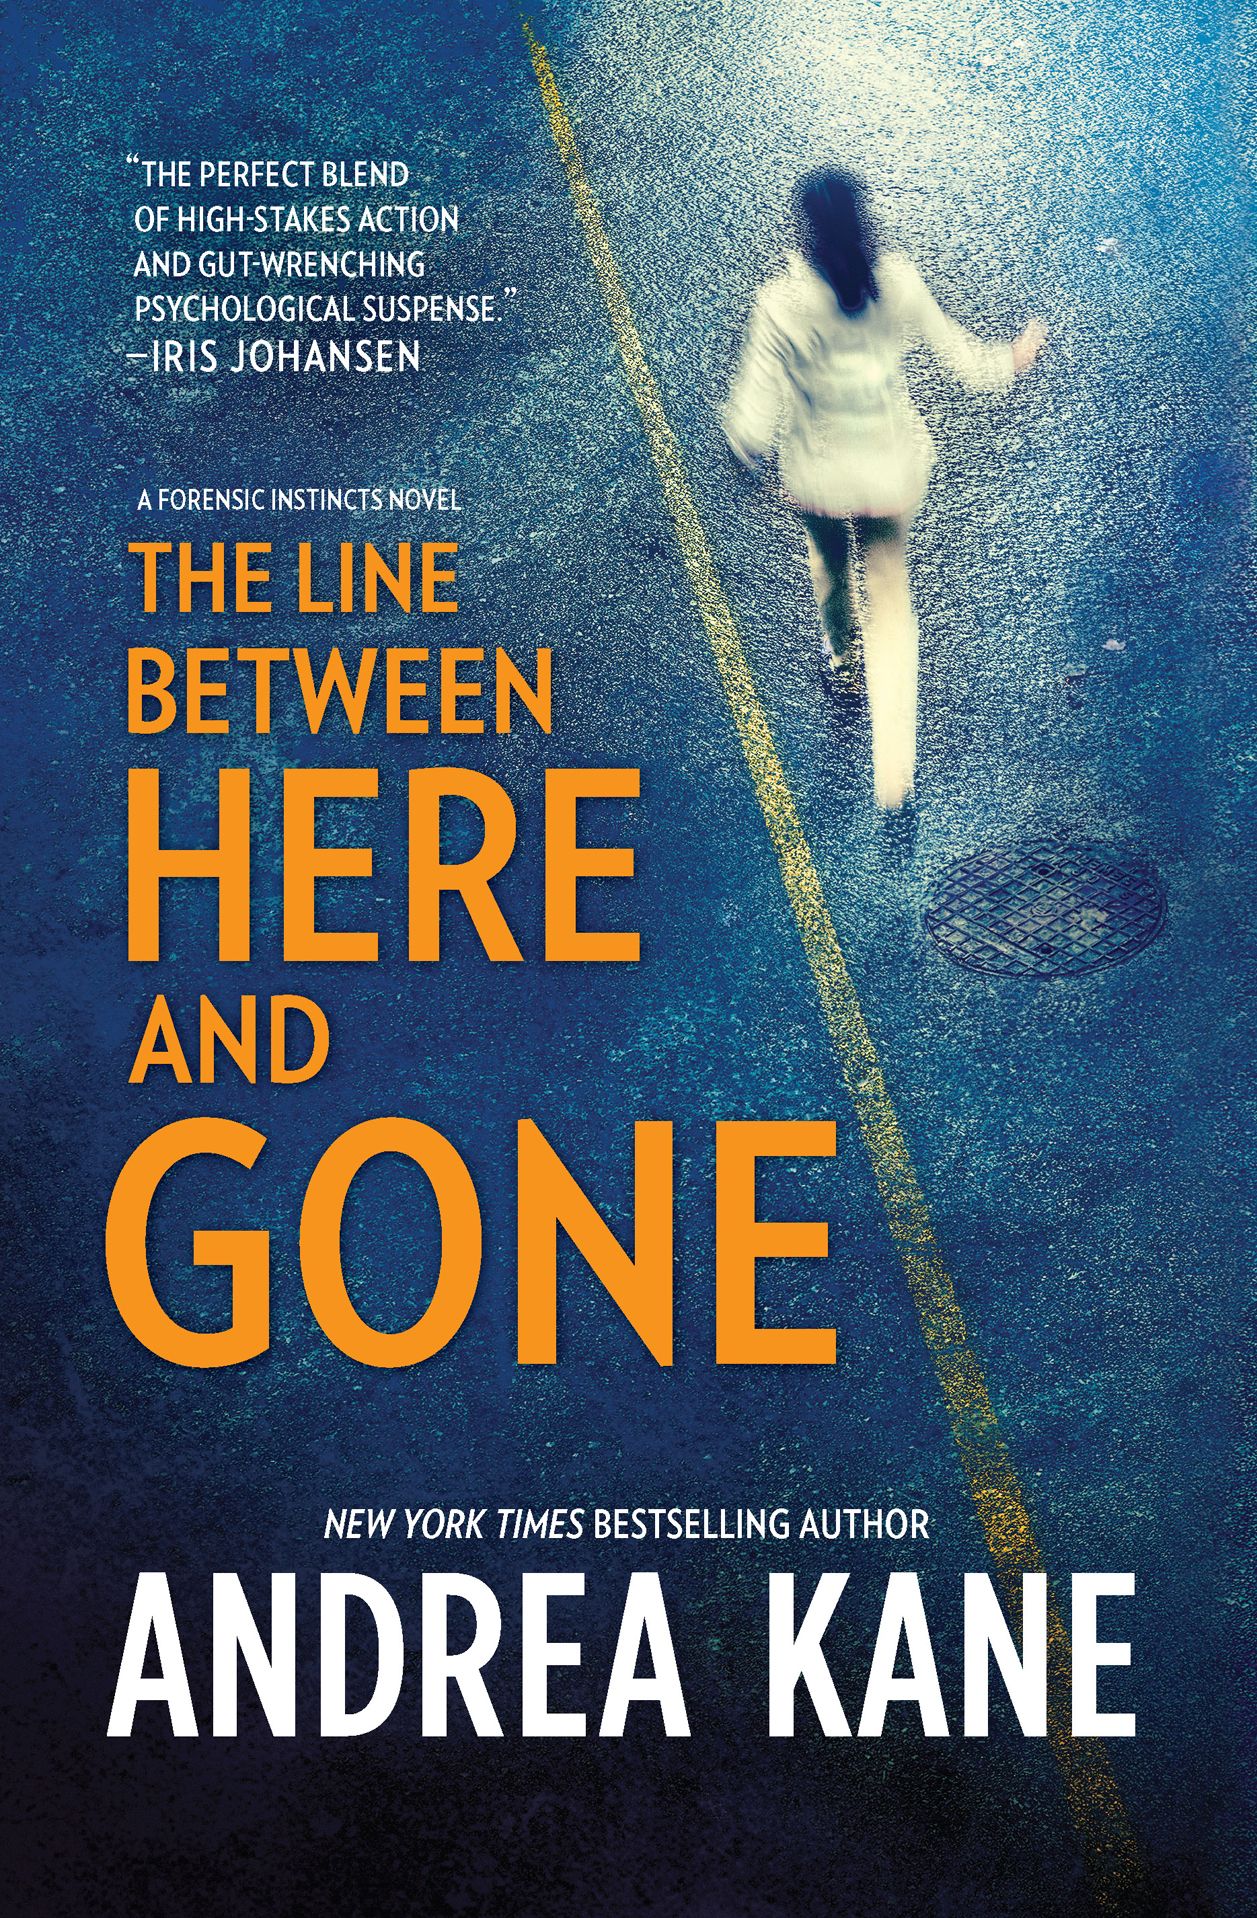 Andrea Kane - The Line Between Here and Gone | BOOKS | Pinterest ...